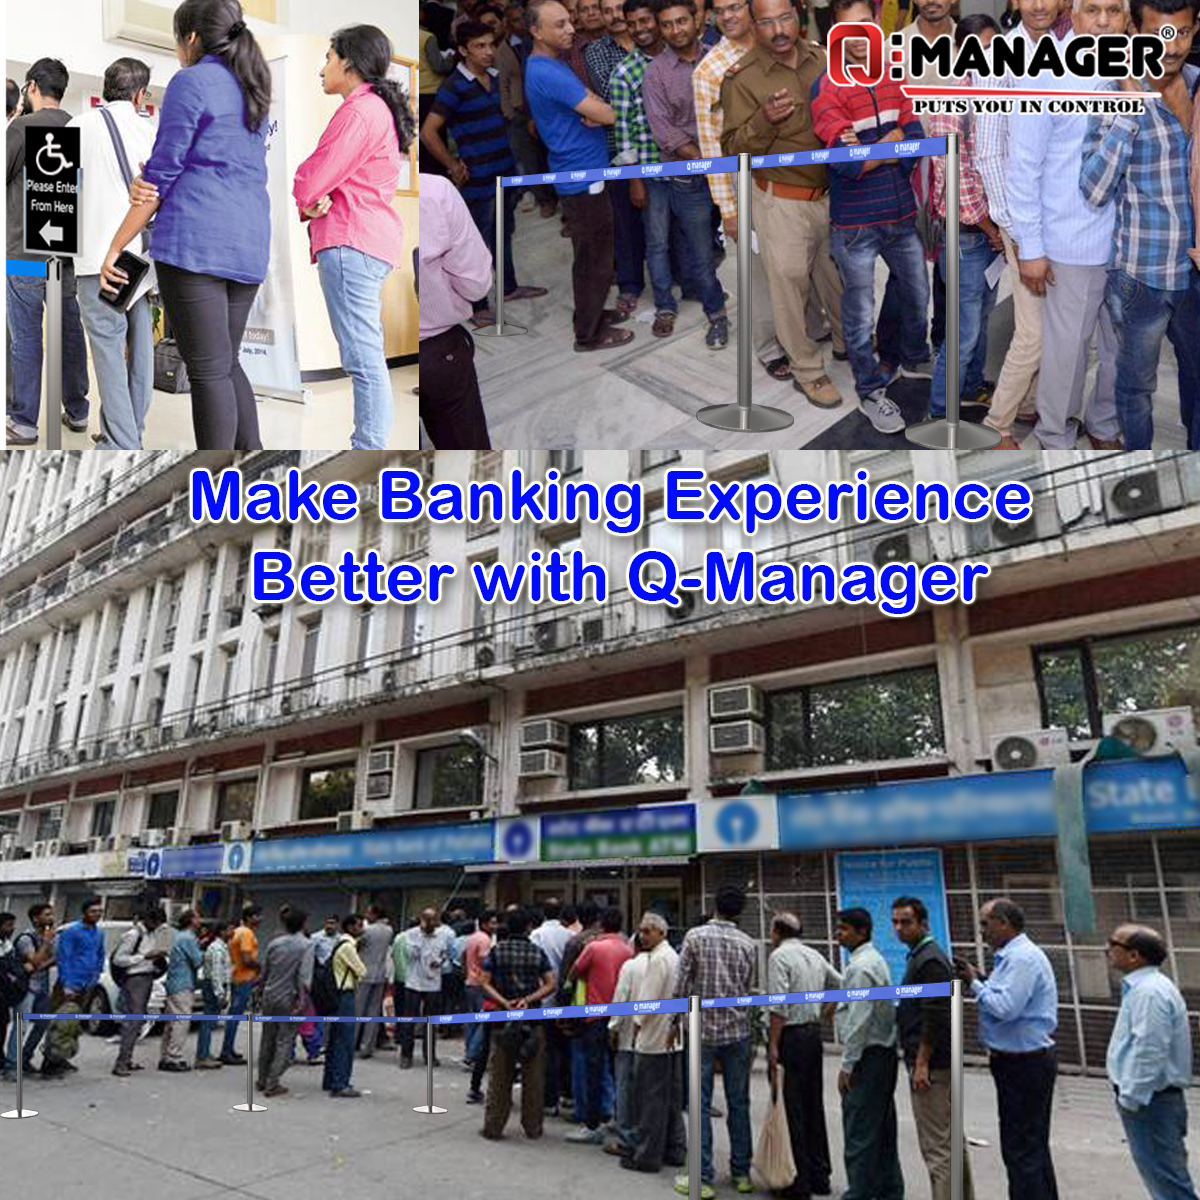 Make Banking Experience Better with Q-Manager.